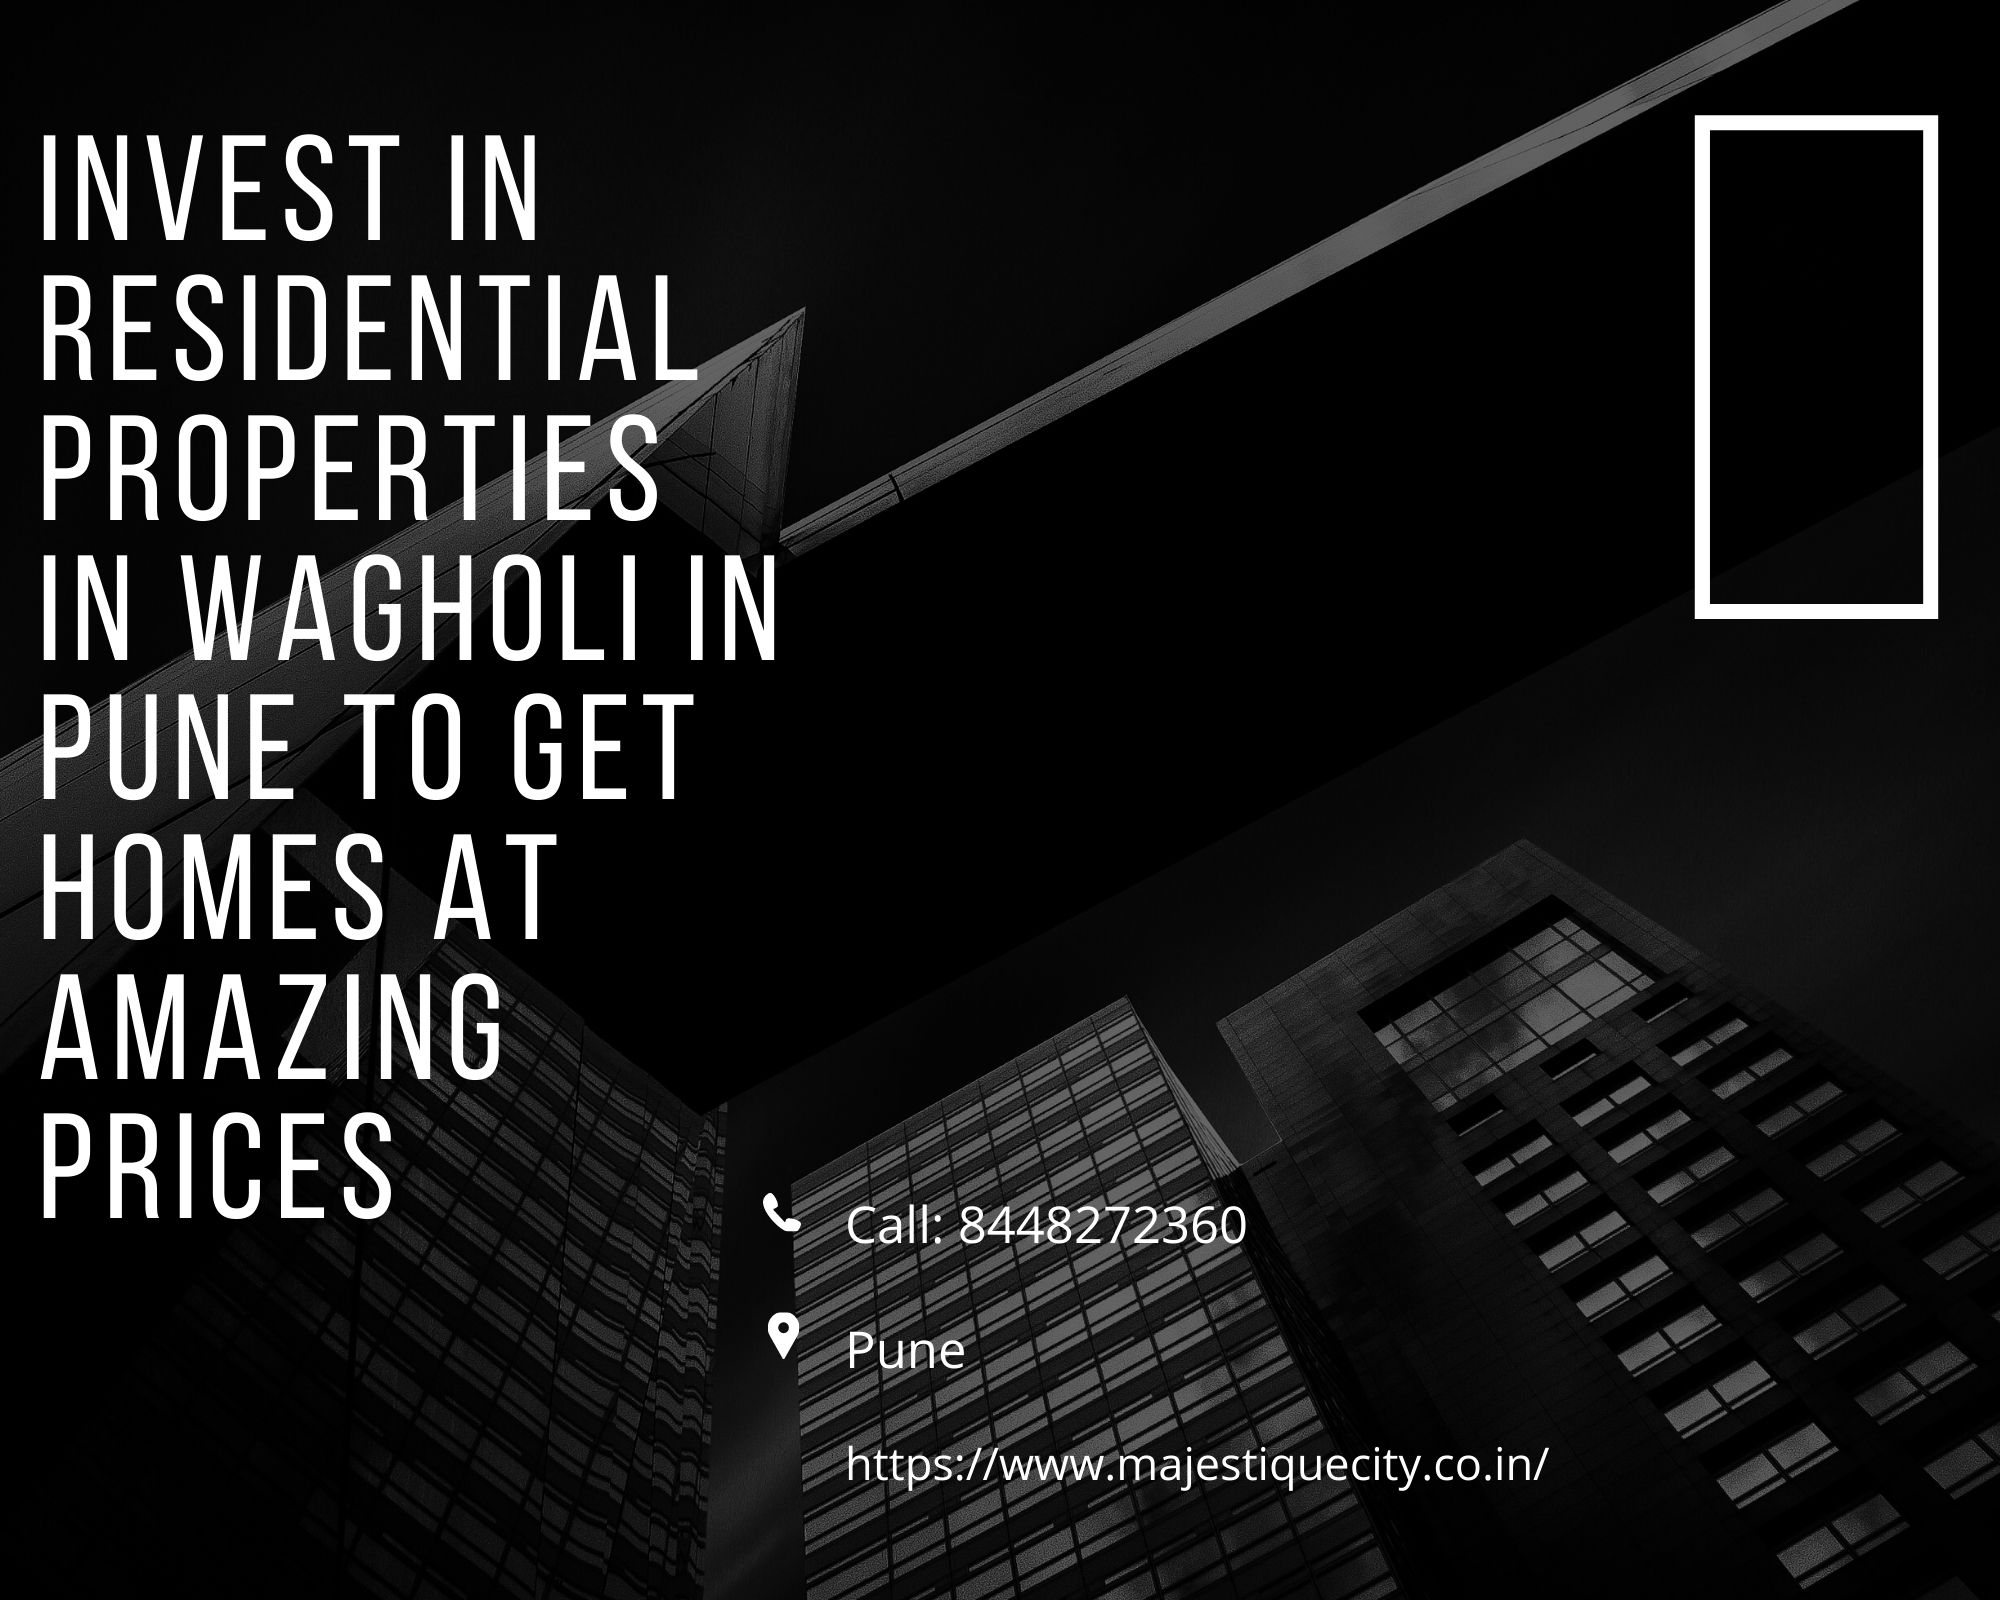 Invest in residential properties in Wagholi in Pune to get homes at amazing prices